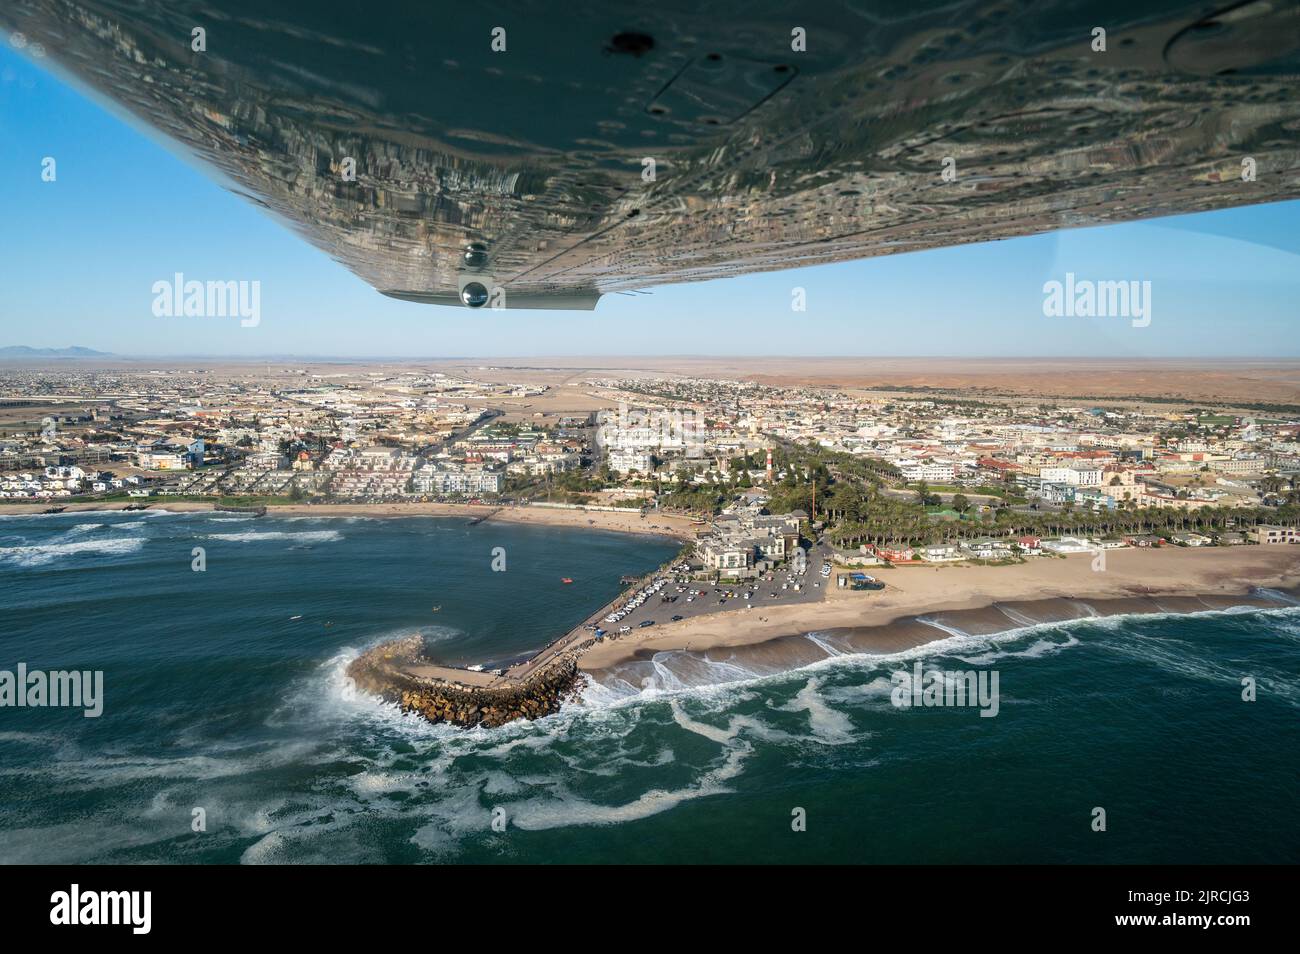 Aerial view on the coast in Namibia and historical districrts of the city Swakopmund in the Namib desert, Atlantic ocean, Africa Stock Photo